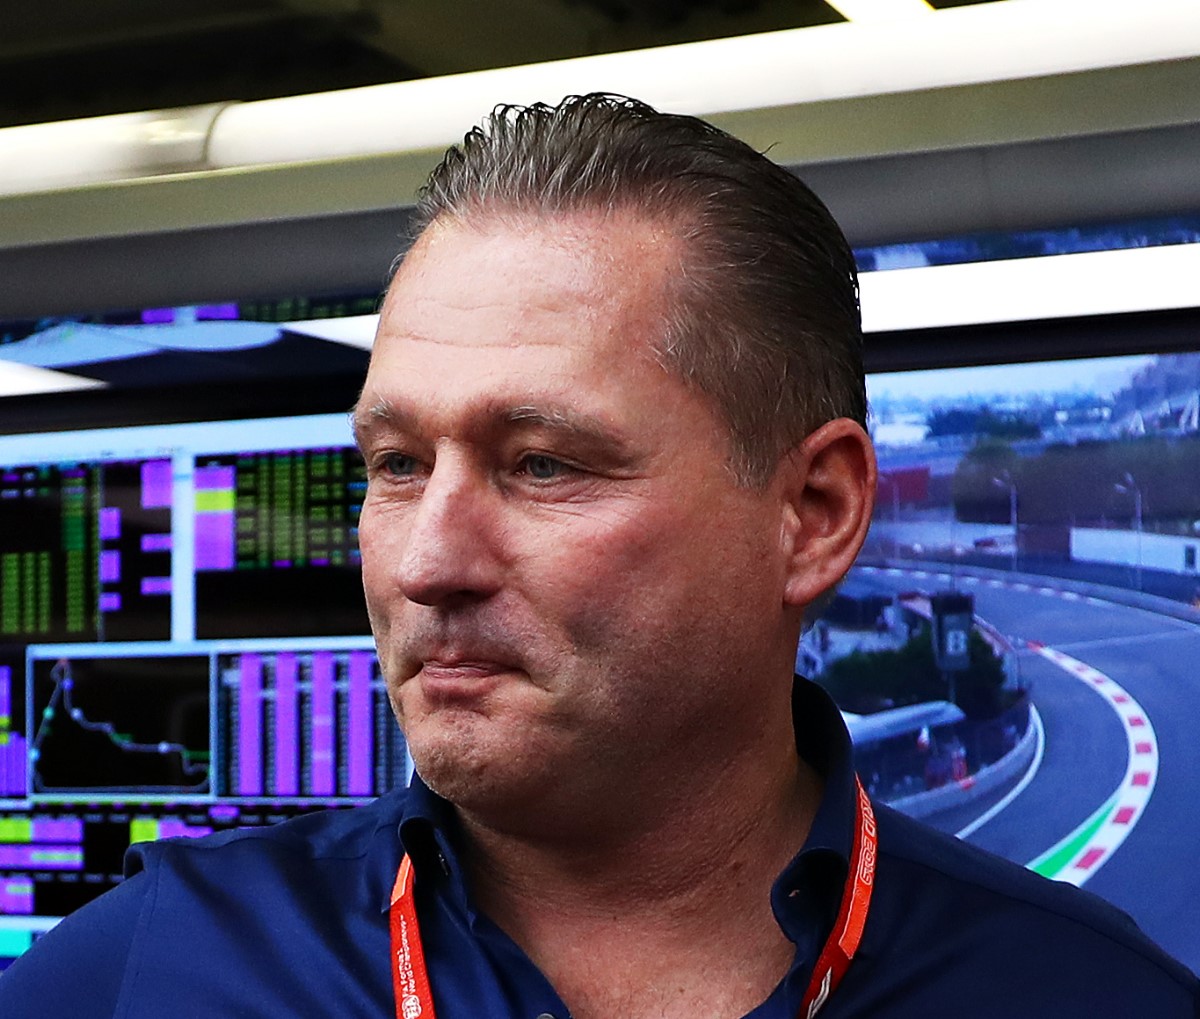 Jos Verstappen would hate to see his son lose a full season while in his prime